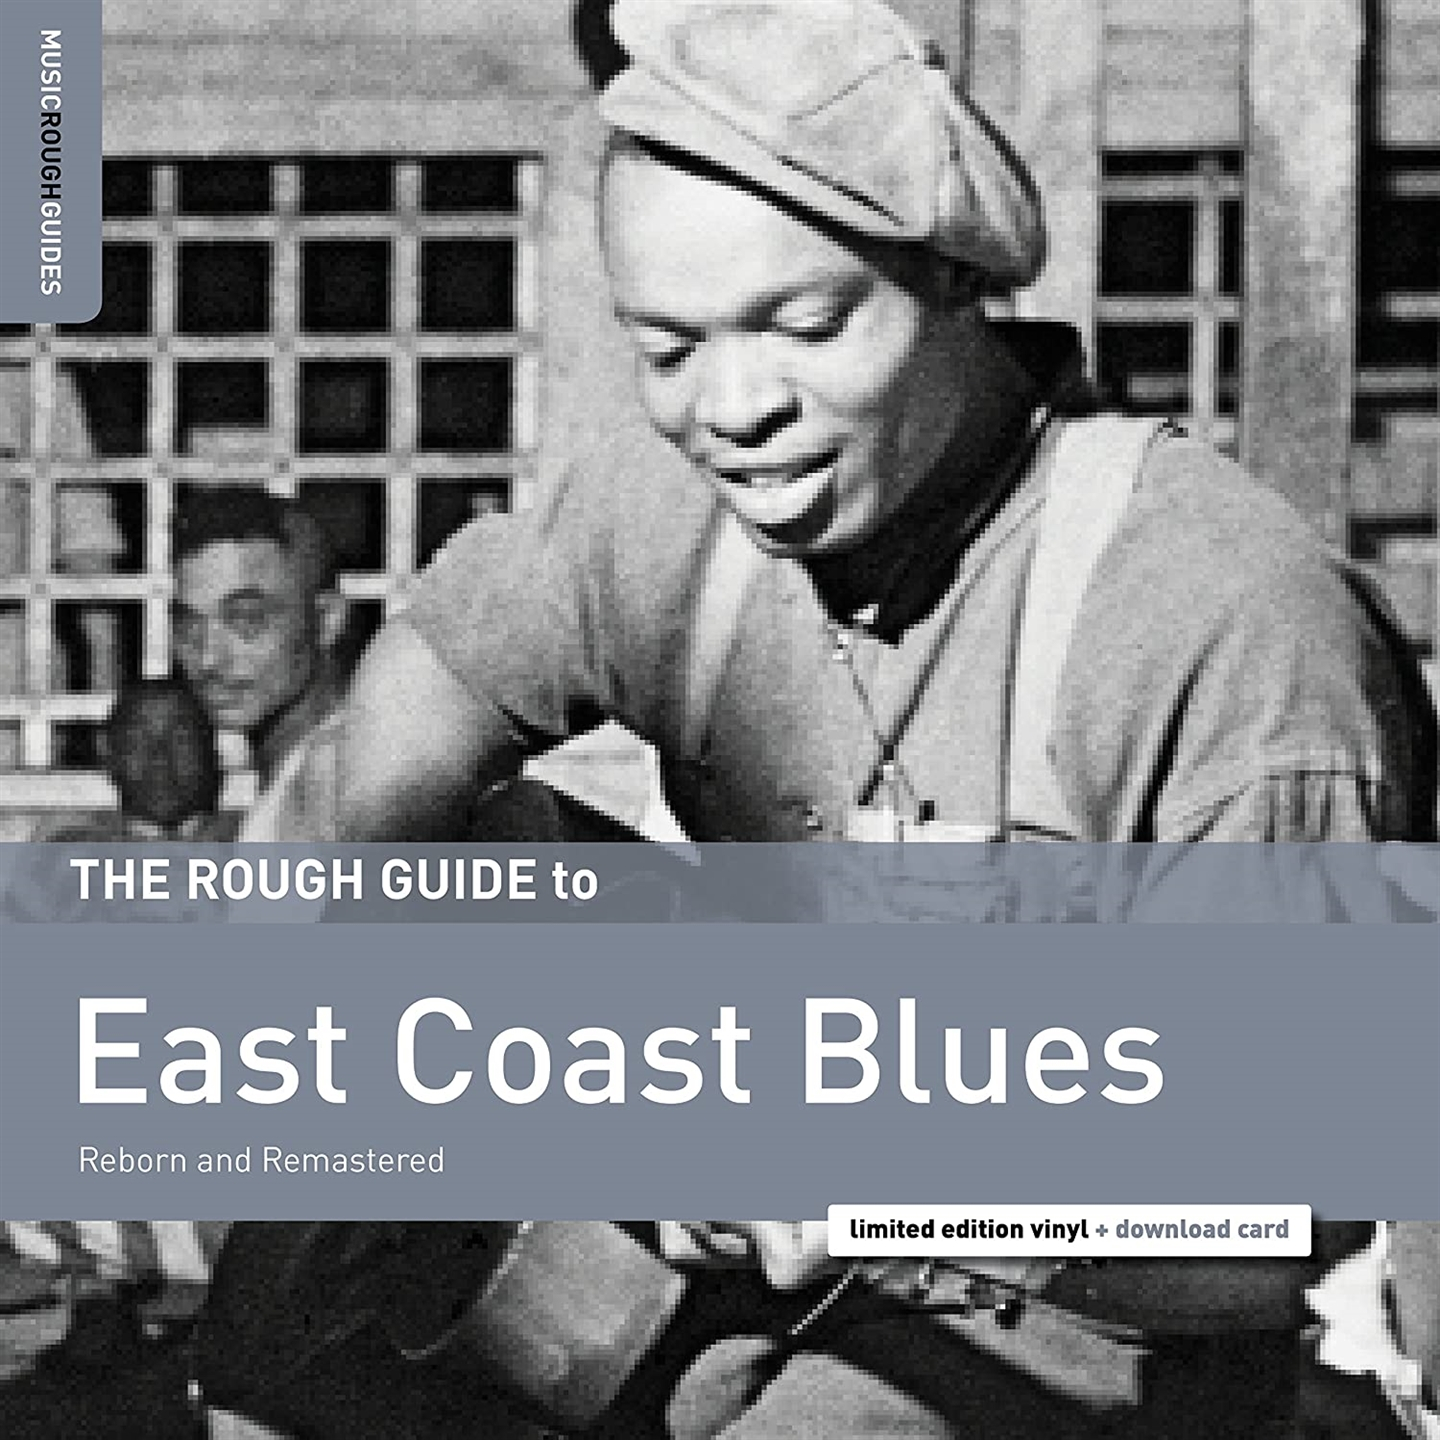 THE ROUGH GUIDE TO EAST COAST BLUES [LP]